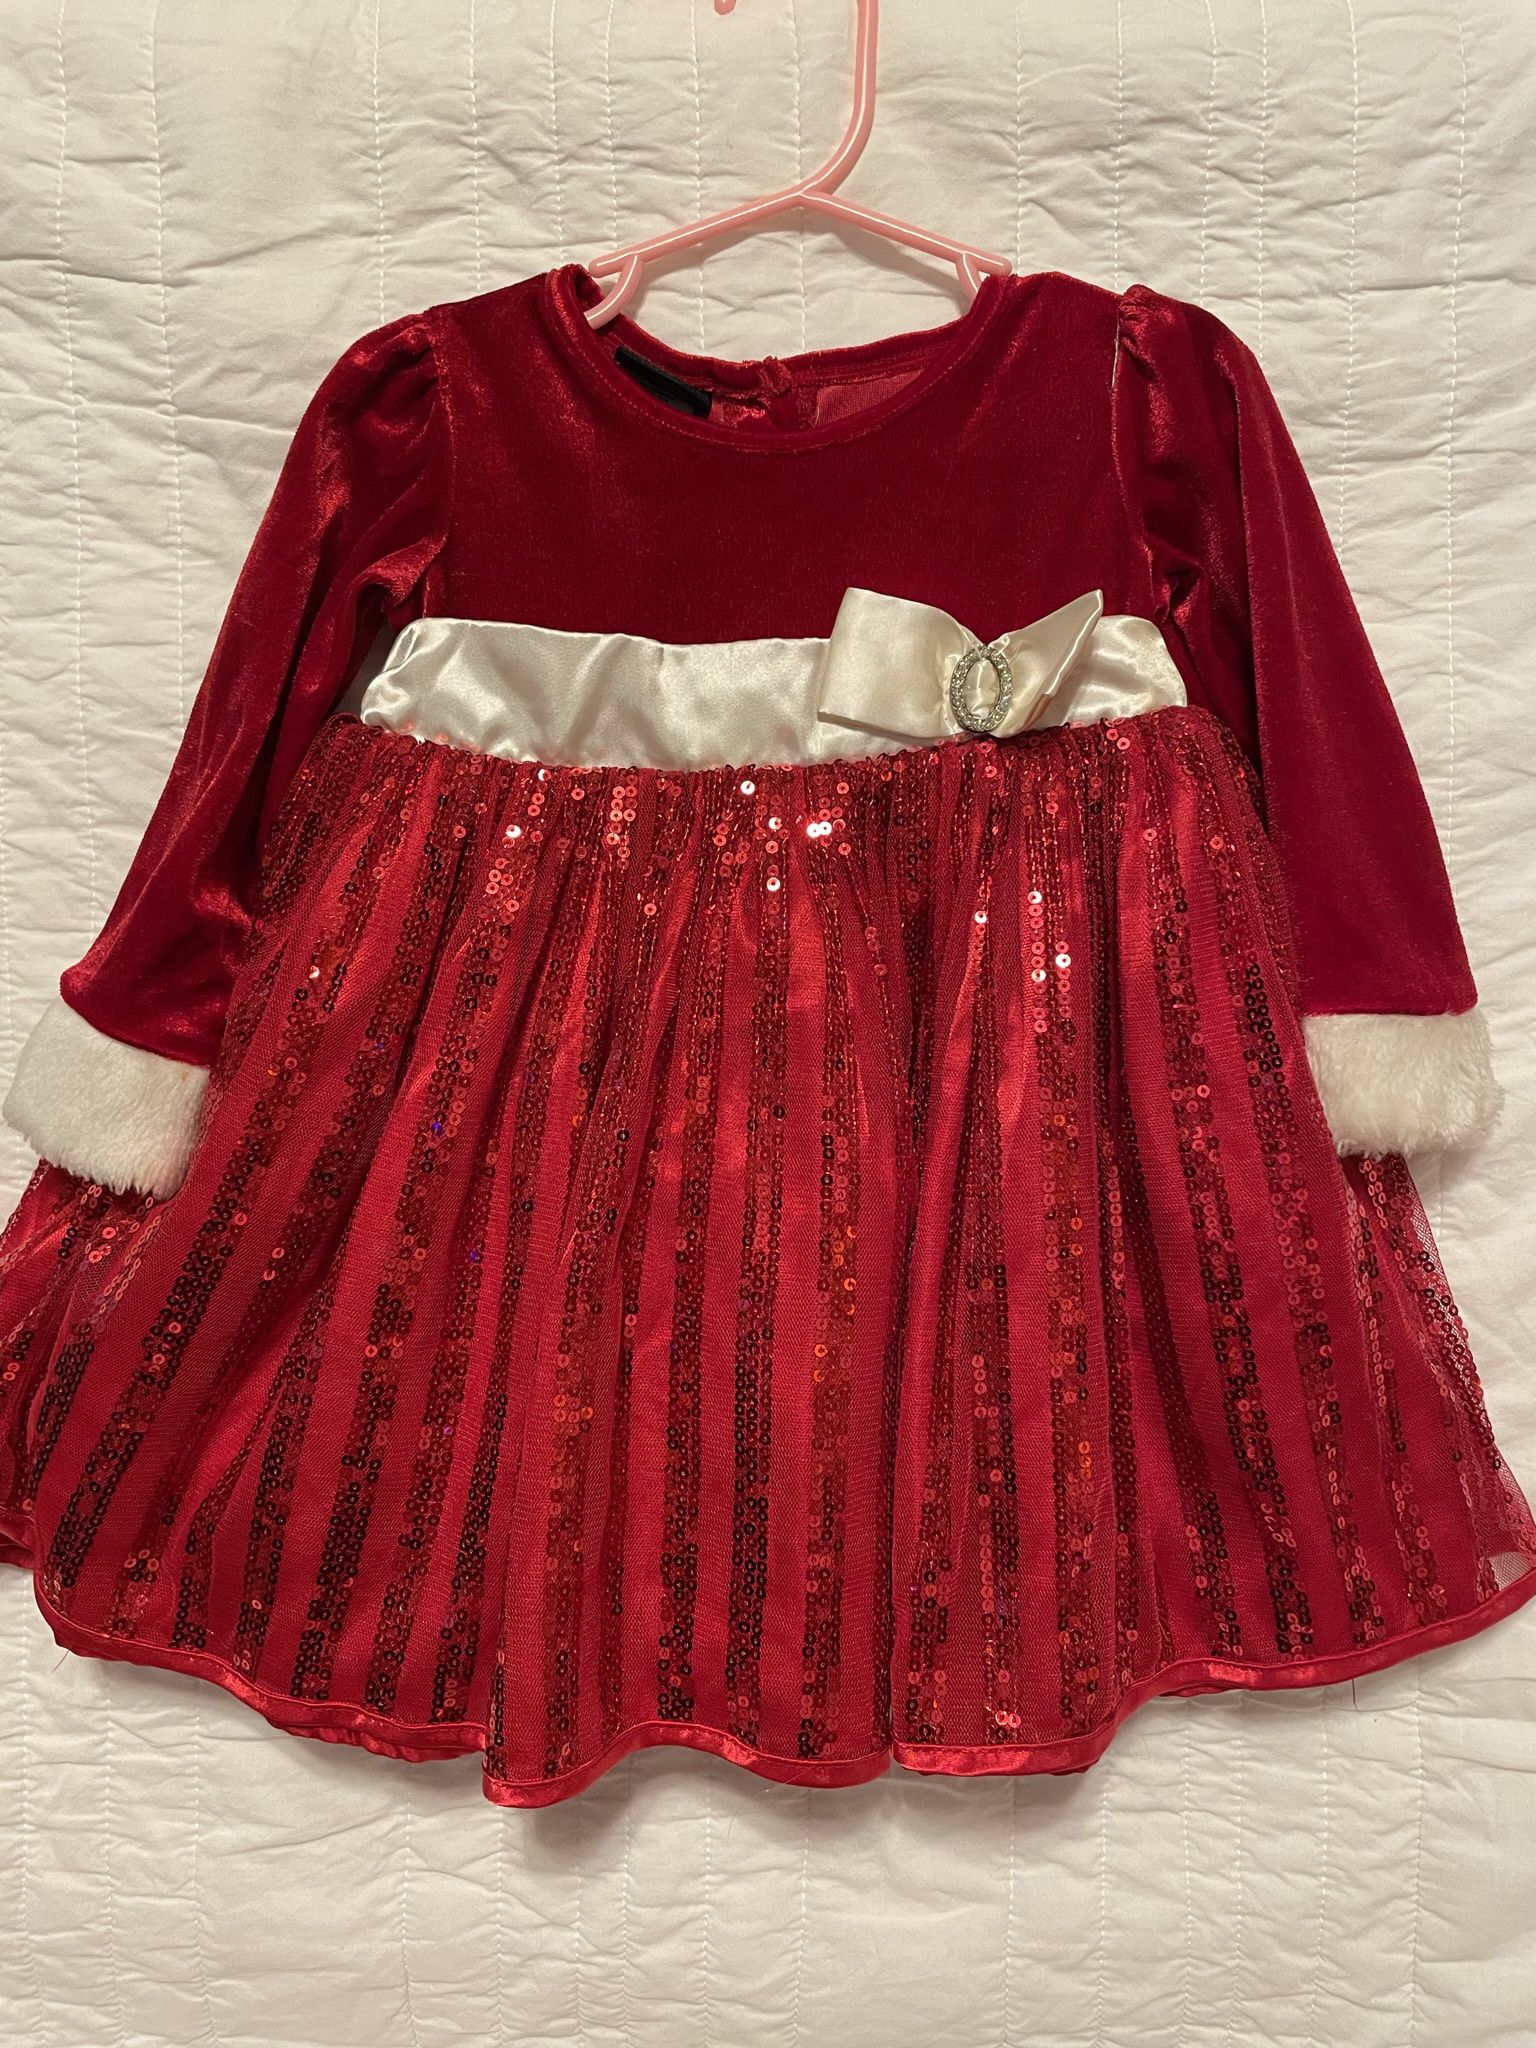 Holiday Editions Red Velvet Holiday Toddler Dress Size 18 Months 